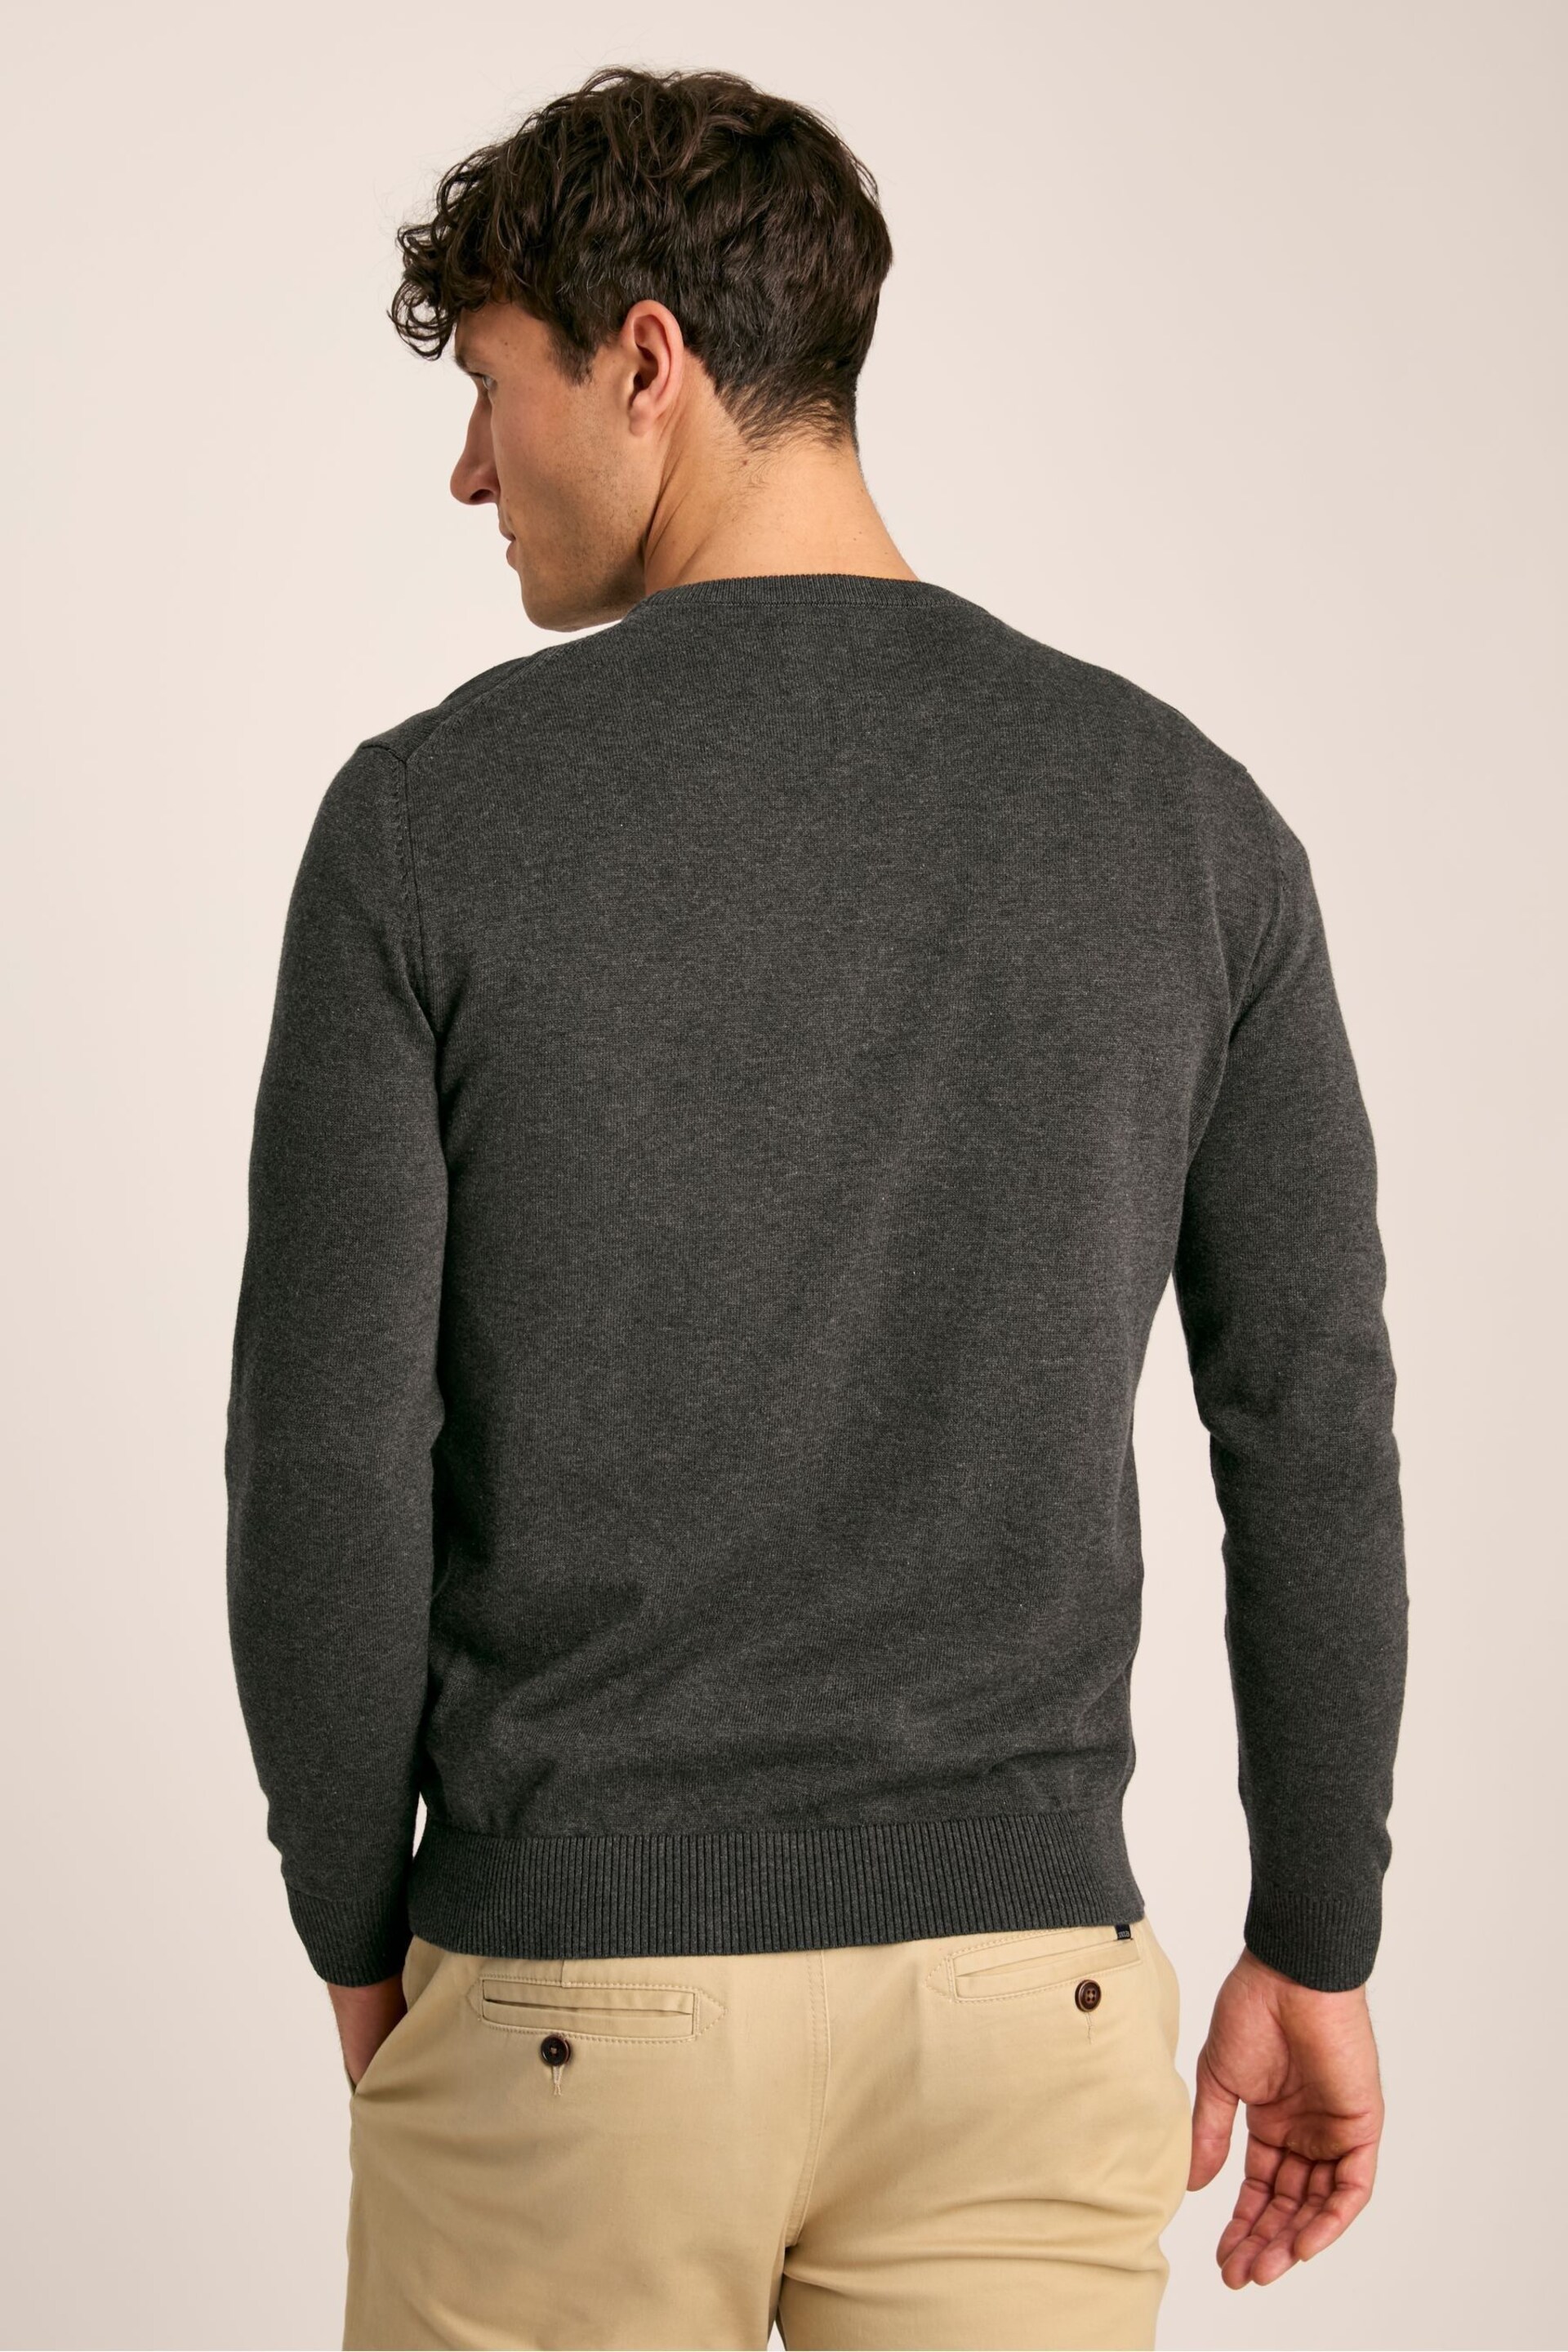 Joules Jarvis Grey Crew Neck Knitted Jumper - Image 2 of 7